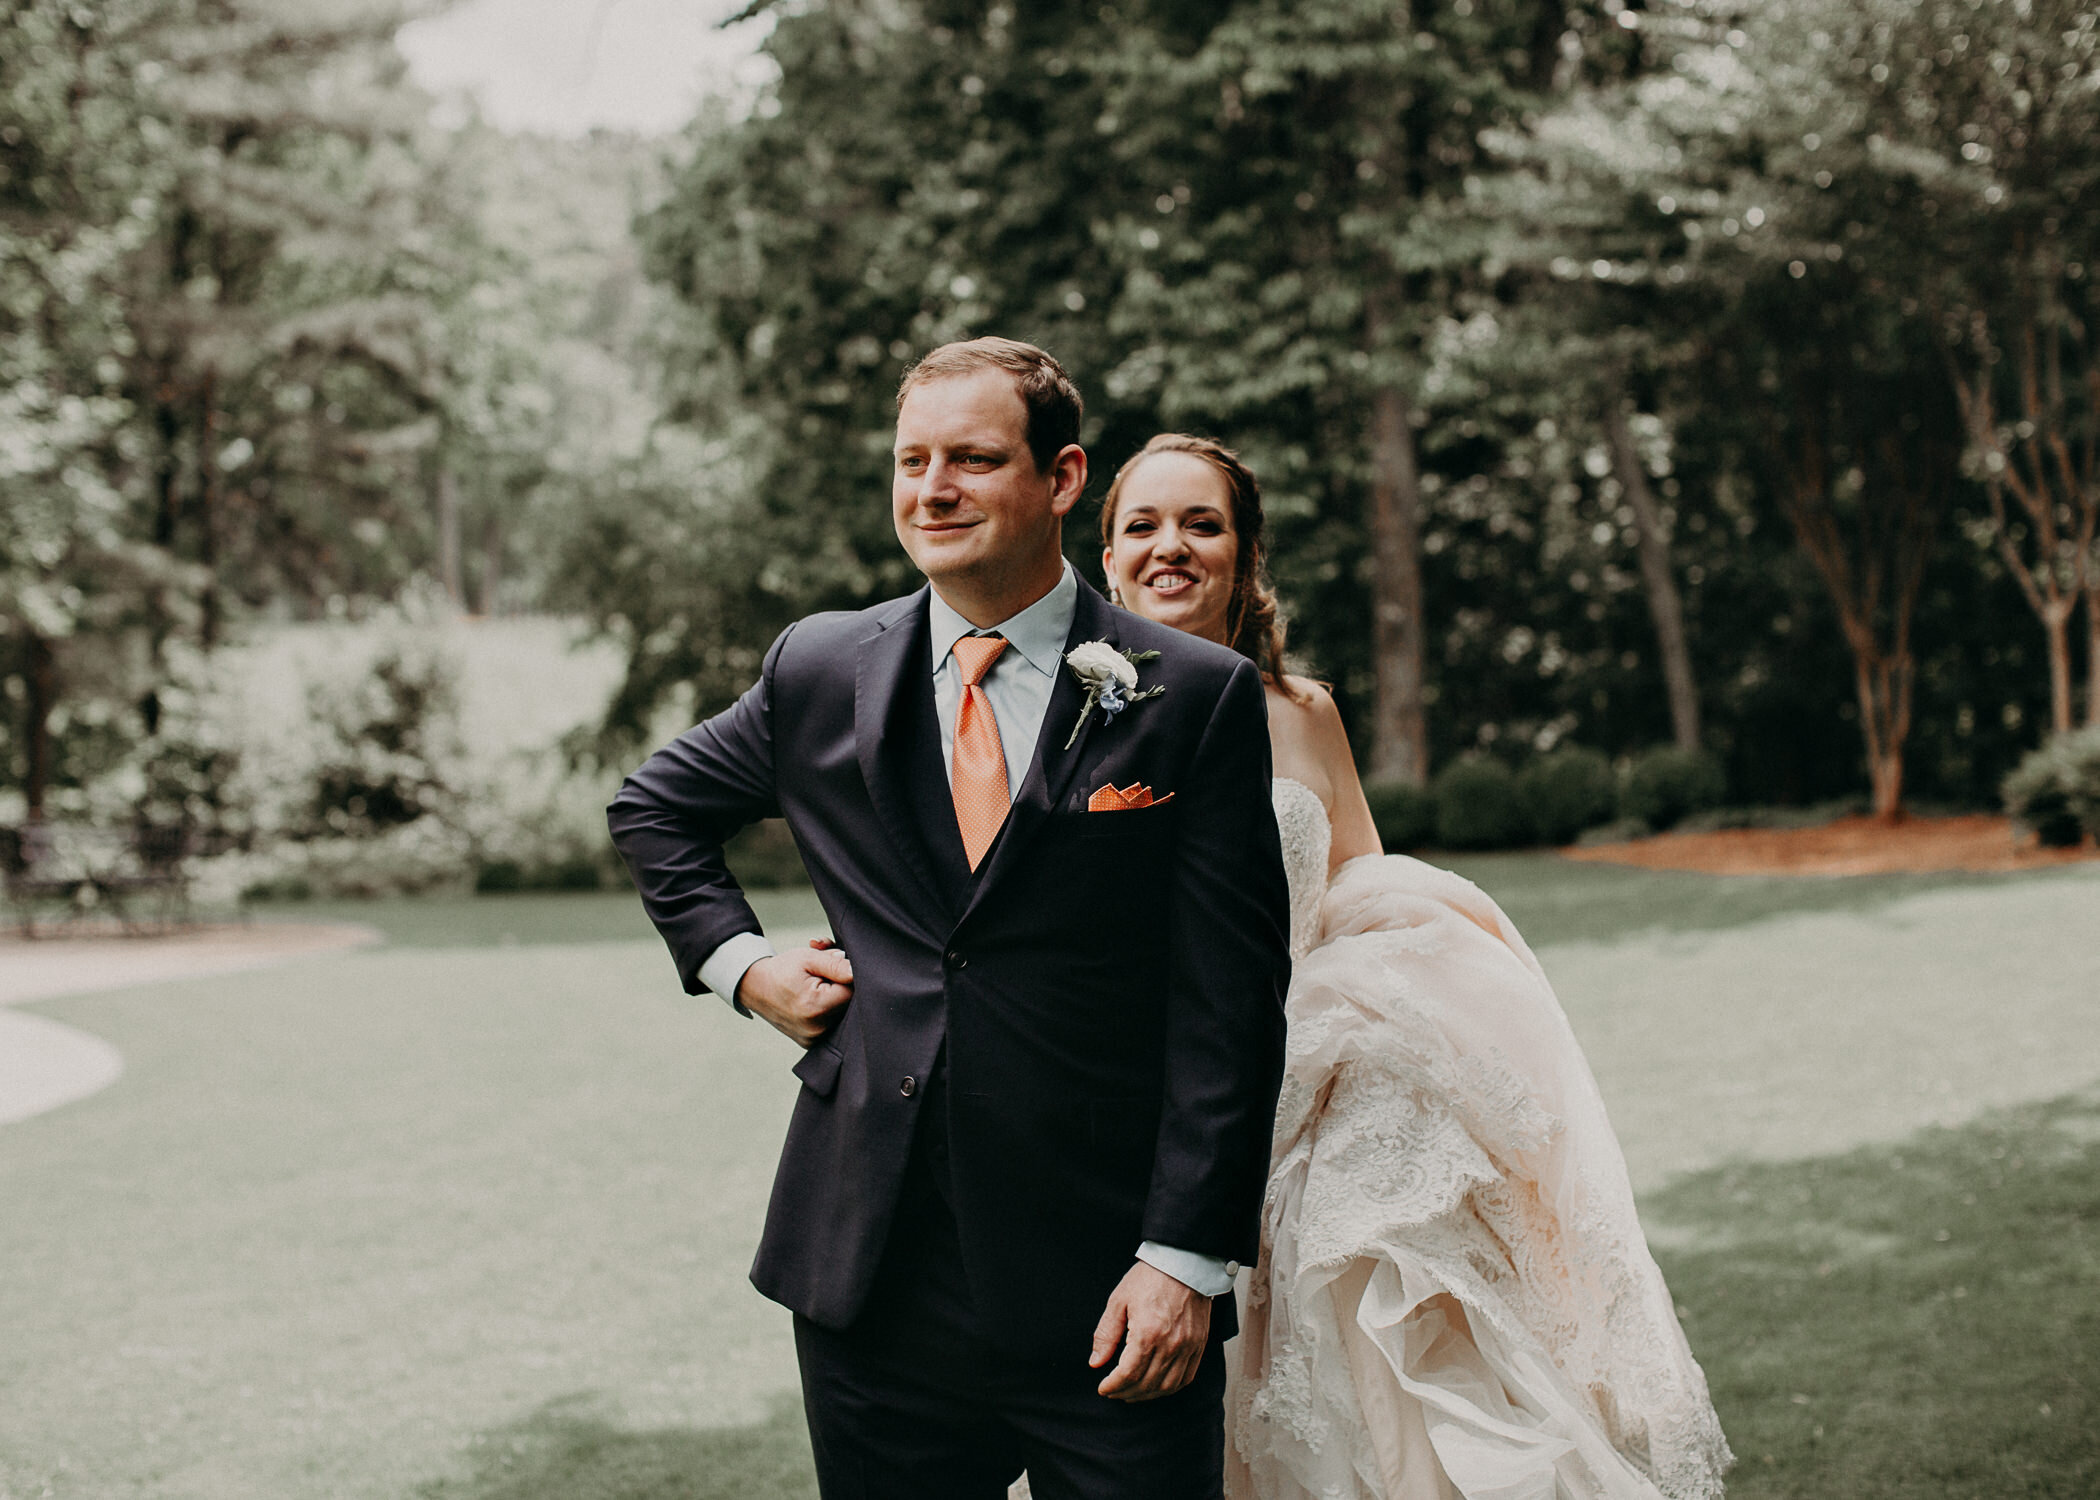 Christa & Ben's Wedding Day || Atlanta Spring Wedding at The Country Club of The South26.jpg